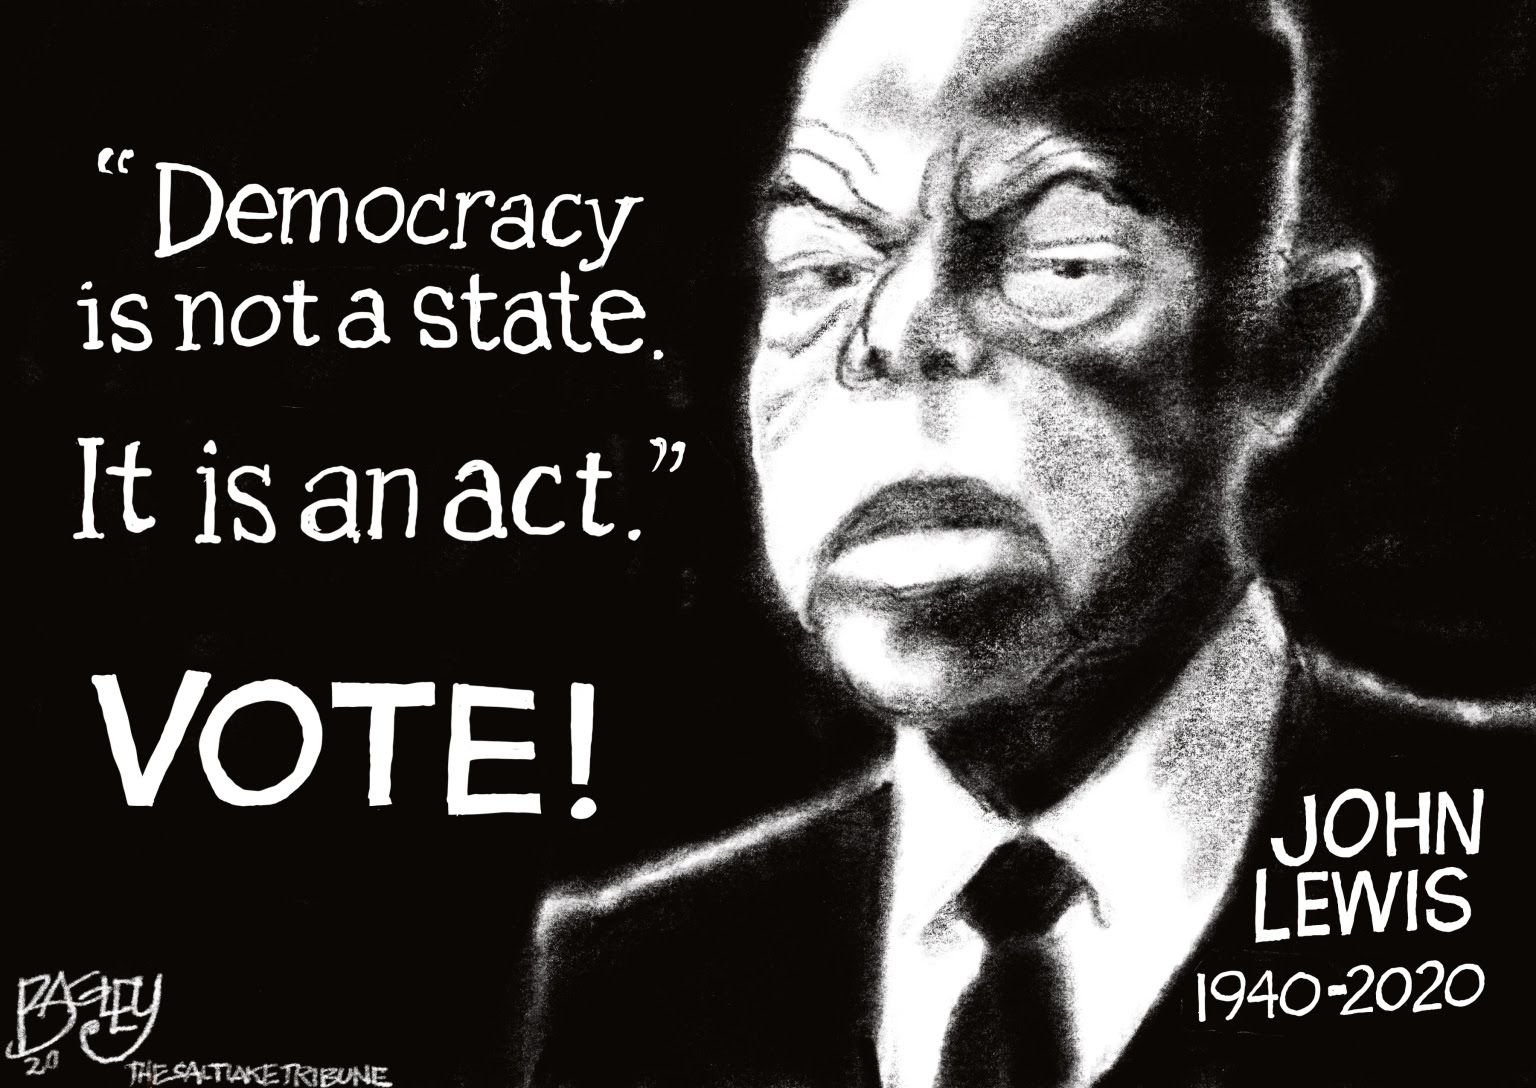 The John Lewis Voting Rights bill protects Democracy.